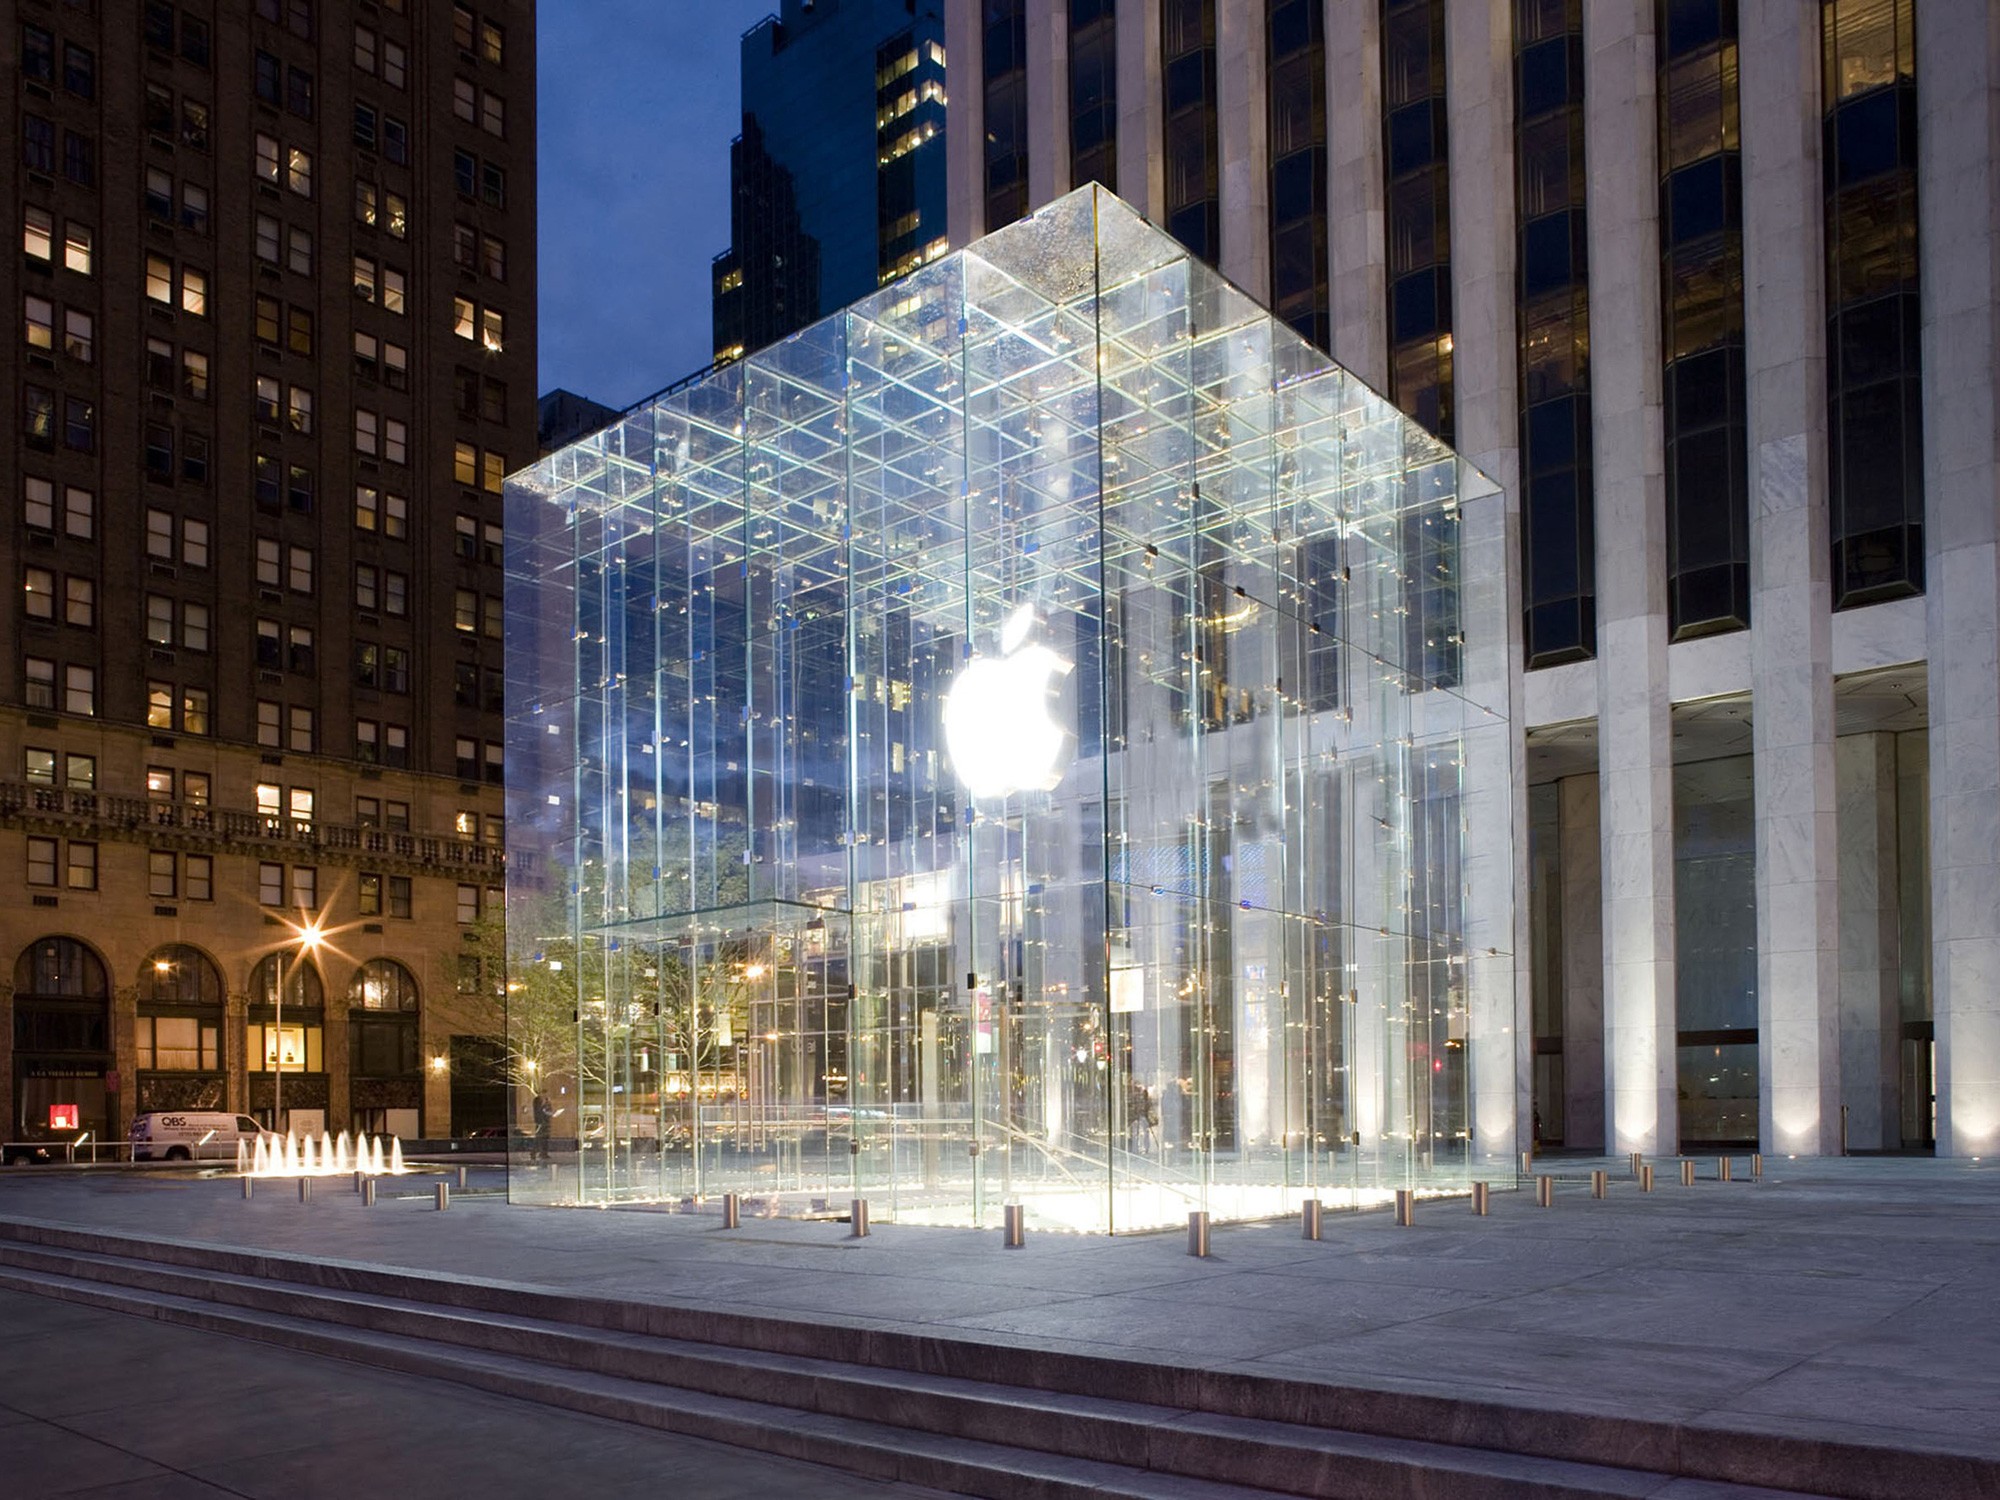 awesome-architecture-modern-ideas-apple-retail-store-design-with-amazing-eight-in-the-applestore-thavenue-cuboid-glass-exterior-be-equipped-brightly-marvellous_glass-room-architecture_architecture_wha.jpg